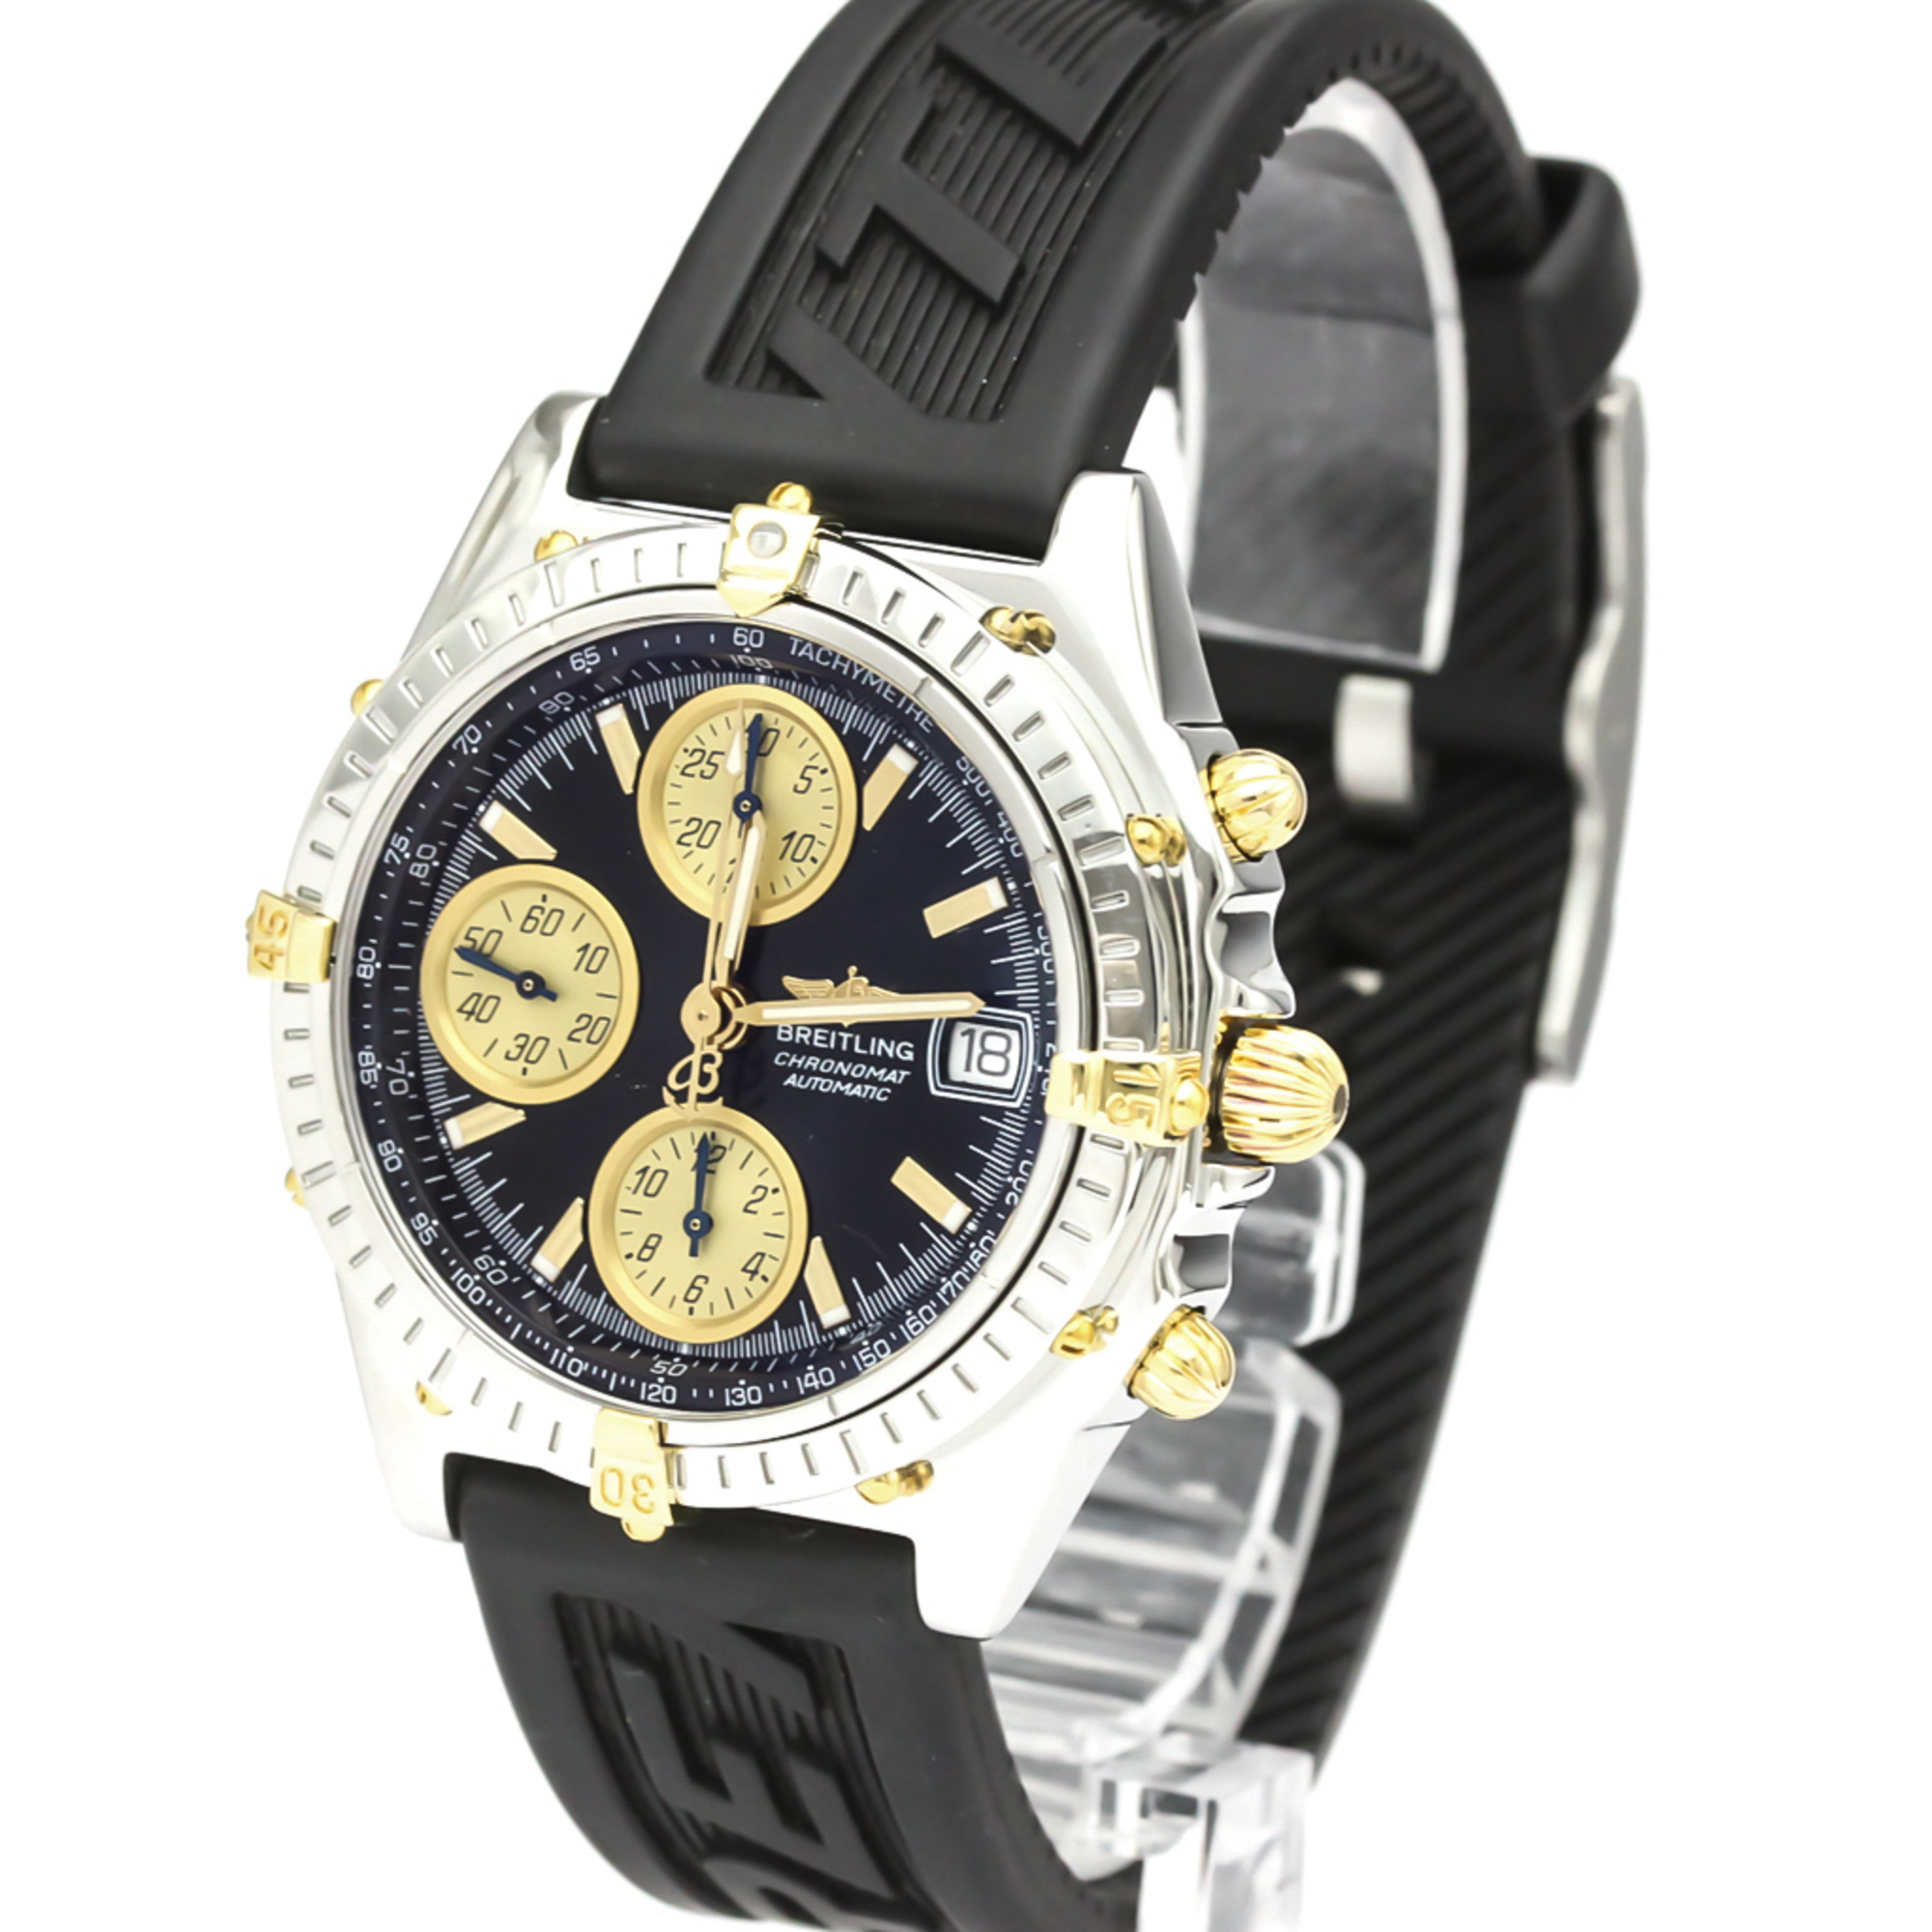 Breitling Chronomat Automatic Stainless Steel,Yellow Gold (18K) Sports Watch B13050.1